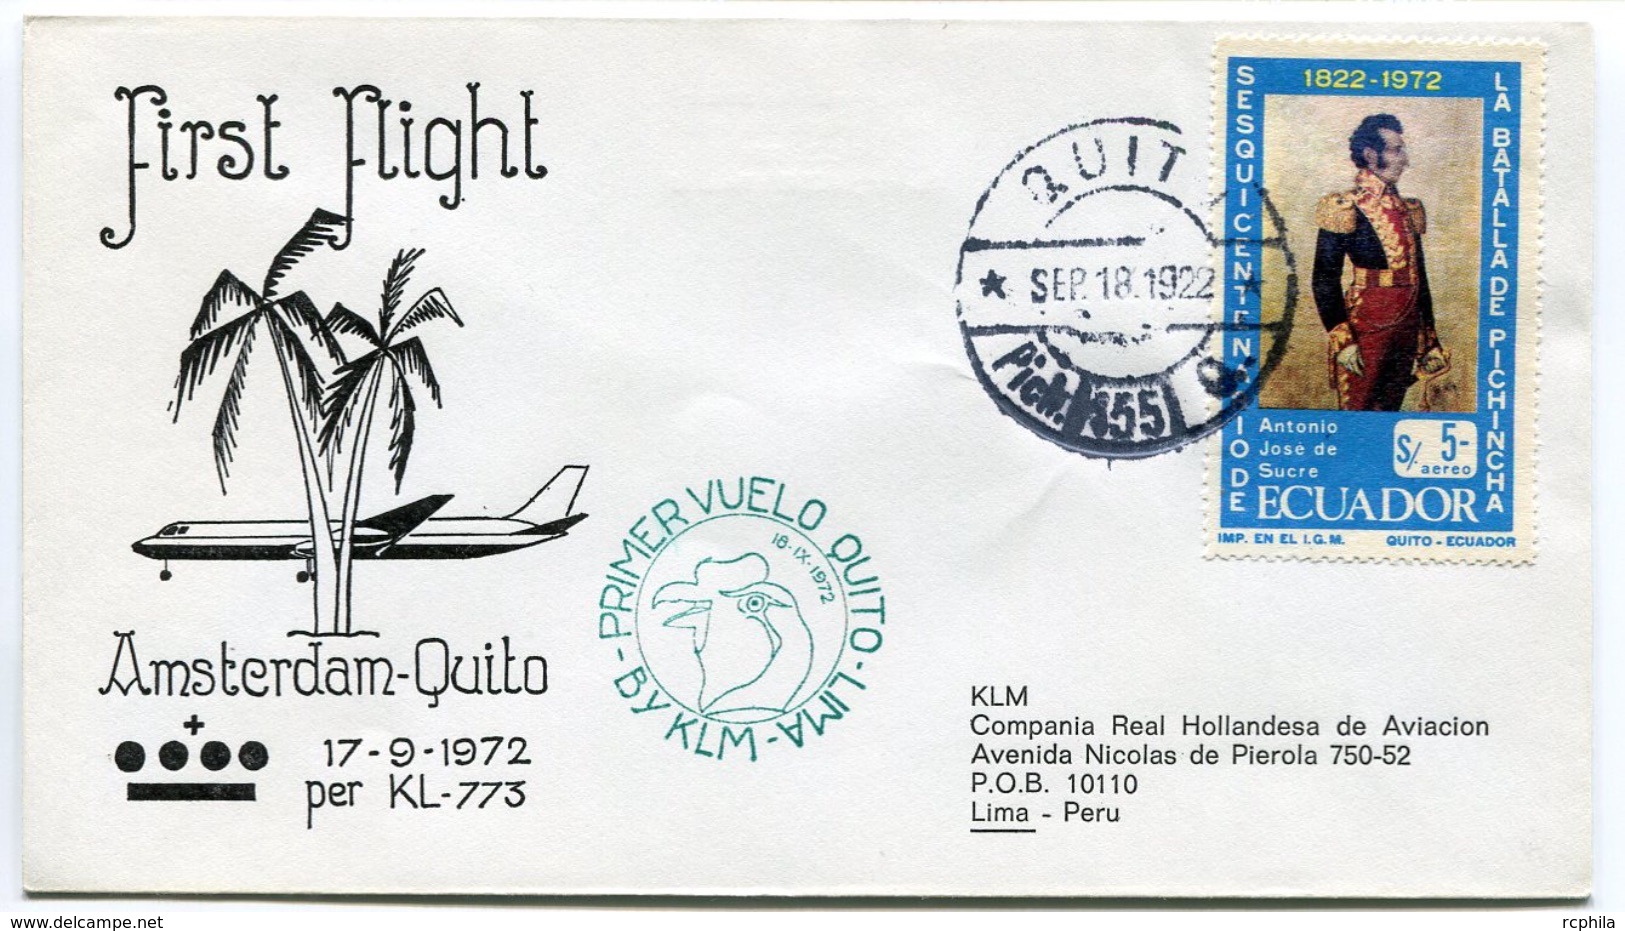 RC 6703 PAYS-BAS KLM 1972 1er VOL AMSTERDAM - QUITO EQUATEUR FFC NETHERLANDS LETTRE COVER - Airmail